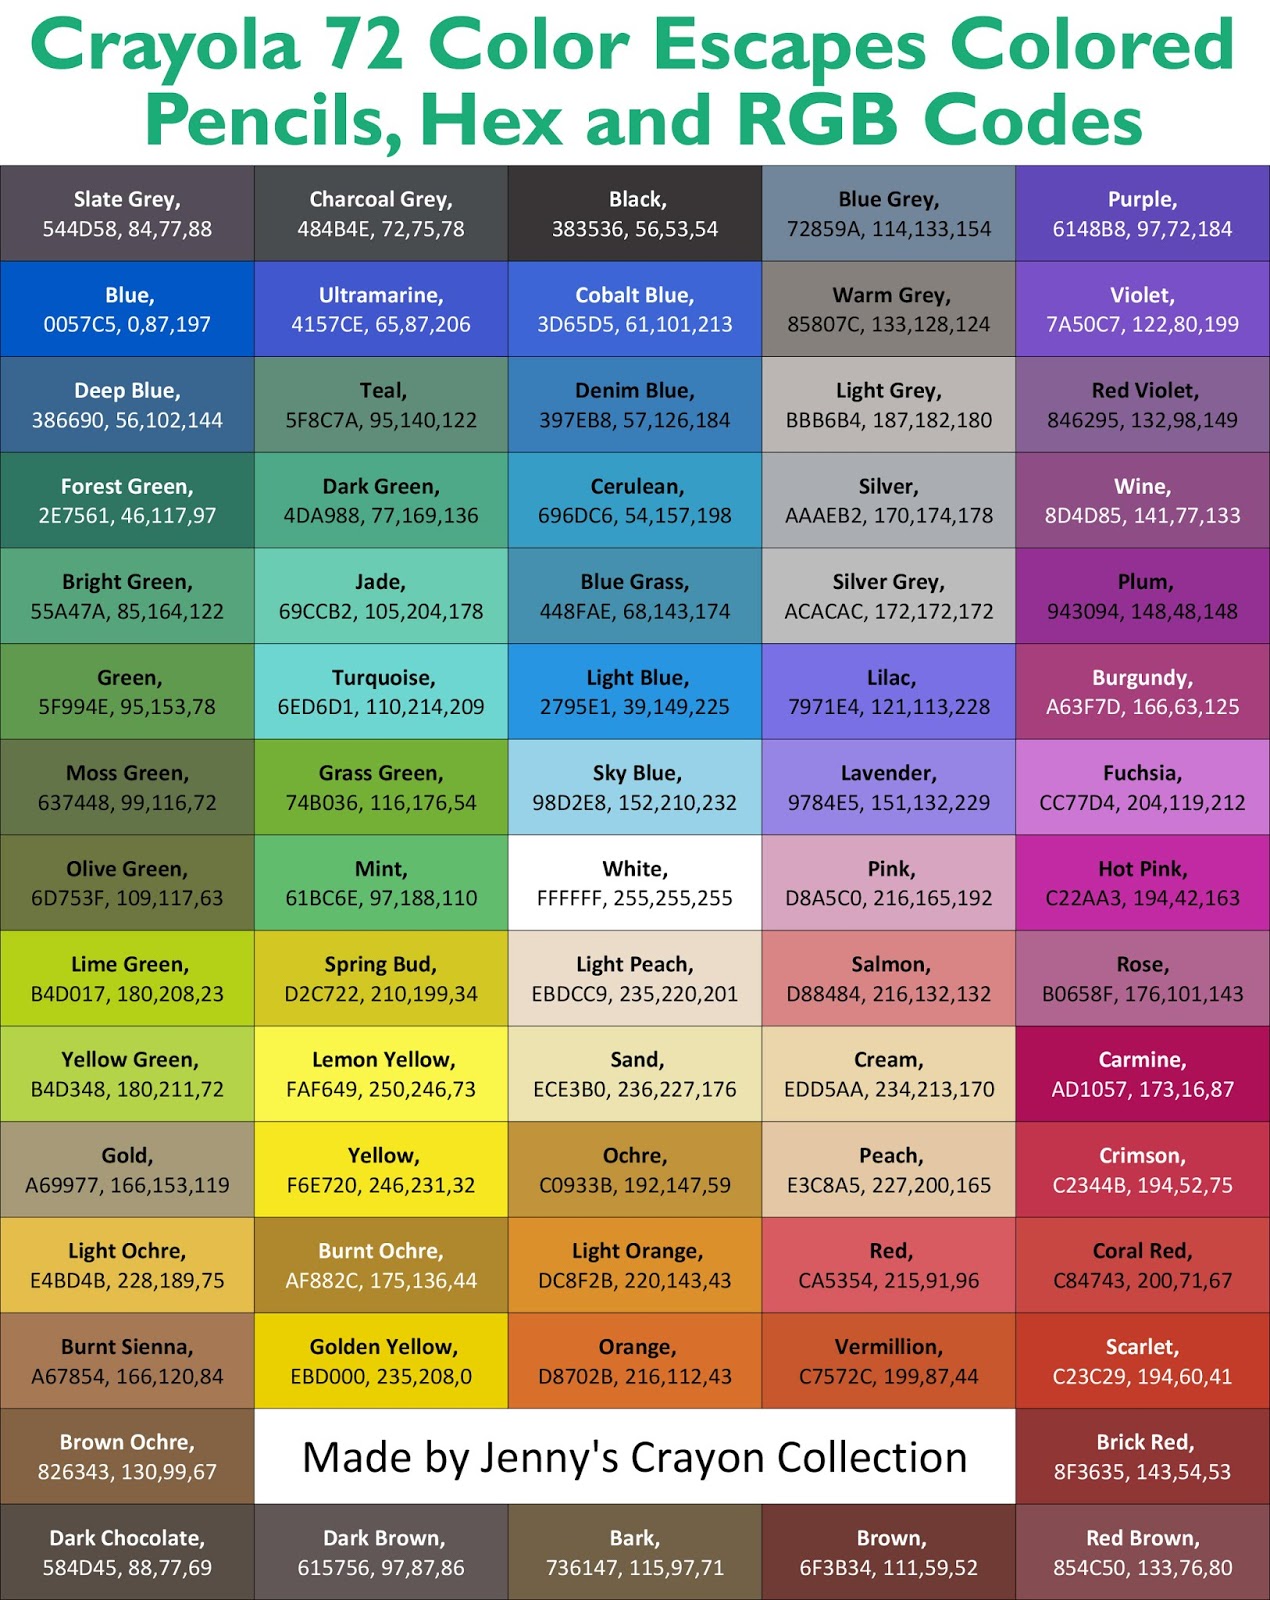 Complete List of Current Crayola Colored Pencil Colors | Jenny's Crayon ...